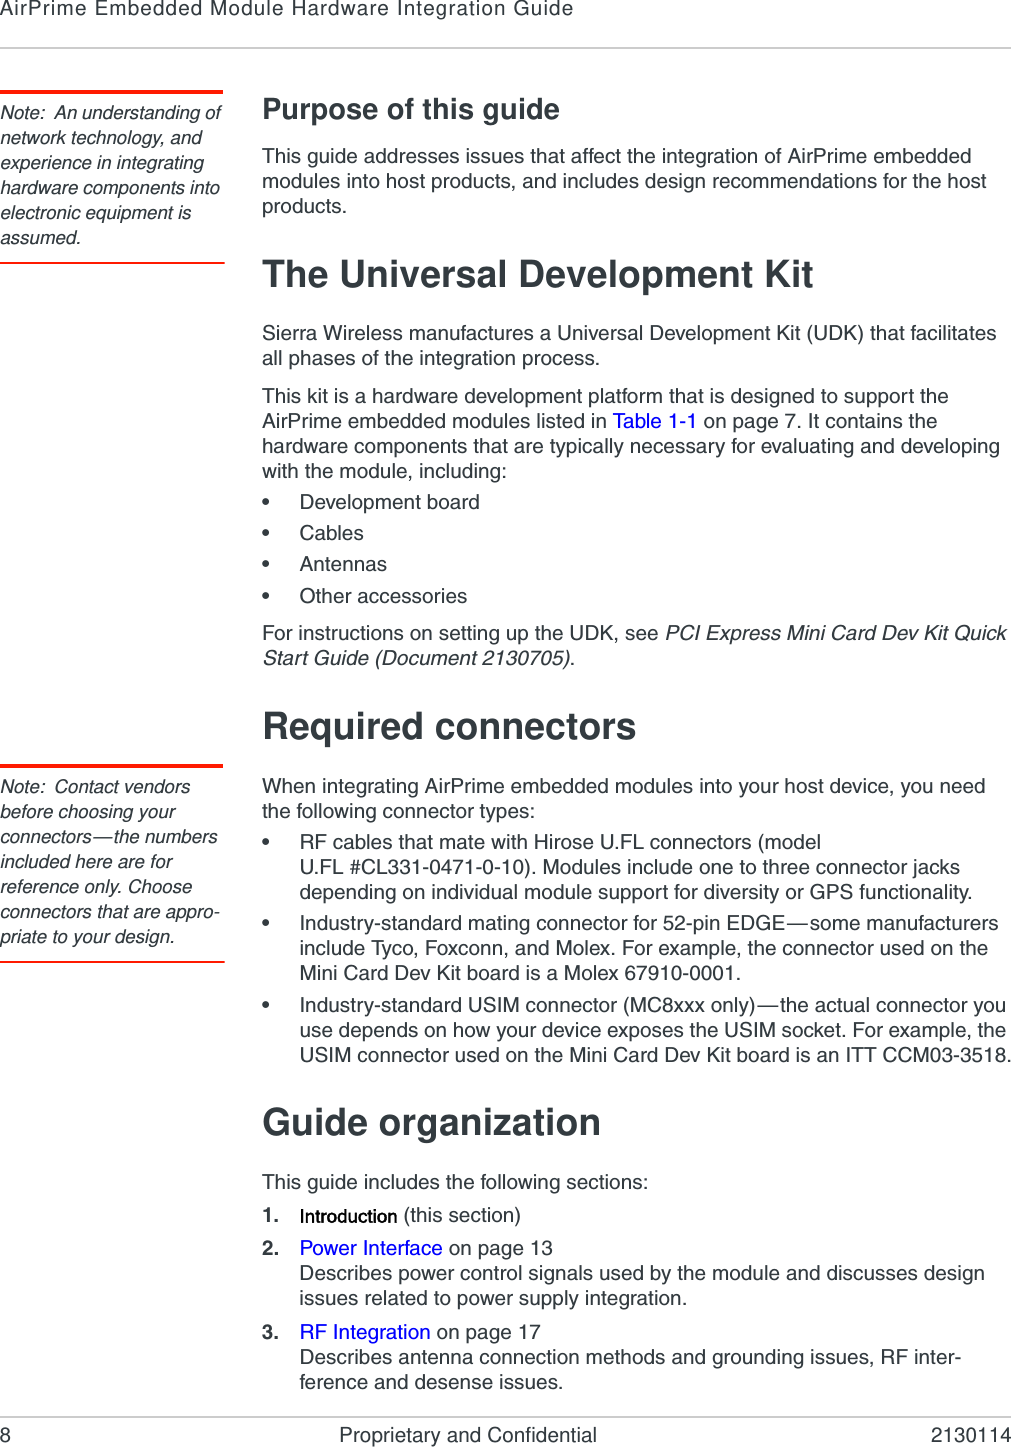 AirPrime Embedded Module Hardware Integration Guide8 Proprietary and Confidential 2130114Note: An understanding of network technology, and experience in integrating hardware components into electronic equipment is assumed.Purpose of this guideThis guide addresses issues that affect the integration of AirPrime embedded modules into host products, and includes design recommendations for the host products.The Universal Development KitSierra Wireless manufactures a Universal Development Kit (UDK) that facilitates all phases of the integration process.This kit is a hardware development platform that is designed to support the AirPrime embedded modules listed in Ta bl e 1 - 1  on page 7. It contains the hardware components that are typically necessary for evaluating and developing with the module, including:•Development board•Cables•Antennas•Other accessoriesFor instructions on setting up the UDK, see PCI Express Mini Card Dev Kit Quick Start Guide (Document 2130705).Required connectorsNote: Contact vendors before choosing your connectors—the numbers included here are for reference only. Choose connectors that are appro-priate to your design.When integrating AirPrime embedded modules into your host device, you need the following connector types:•RF cables that mate with Hirose U.FL connectors (model U.FL #CL331-0471-0-10). Modules include one to three connector jacks depending on individual module support for diversity or GPS functionality.•Industry-standard mating connector for 52-pin EDGE—some manufacturers include Tyco, Foxconn, and Molex. For example, the connector used on the Mini Card Dev Kit board is a Molex 67910-0001.•Industry-standard USIM connector (MC8xxx only)—the actual connector you use depends on how your device exposes the USIM socket. For example, the USIM connector used on the Mini Card Dev Kit board is an ITT CCM03-3518.Guide organizationThis guide includes the following sections:1. Introduction (this section)2. Power Interface on page 13Describes power control signals used by the module and discusses design issues related to power supply integration.3. RF Integration on page 17Describes antenna connection methods and grounding issues, RF inter-ference and desense issues.